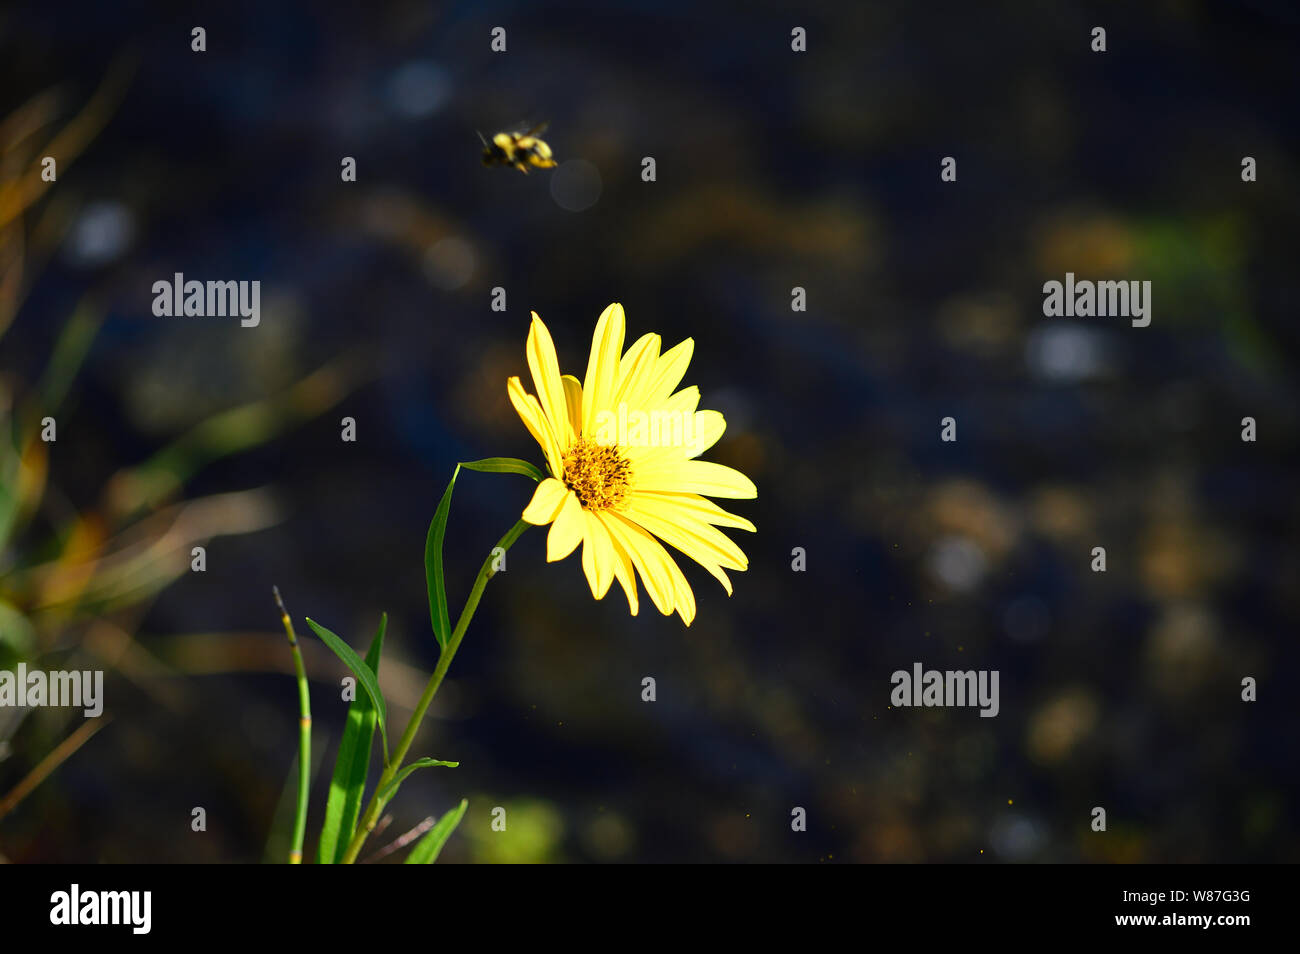 Yellow daisy and bumble bee with blurred dark background. Stock Photo